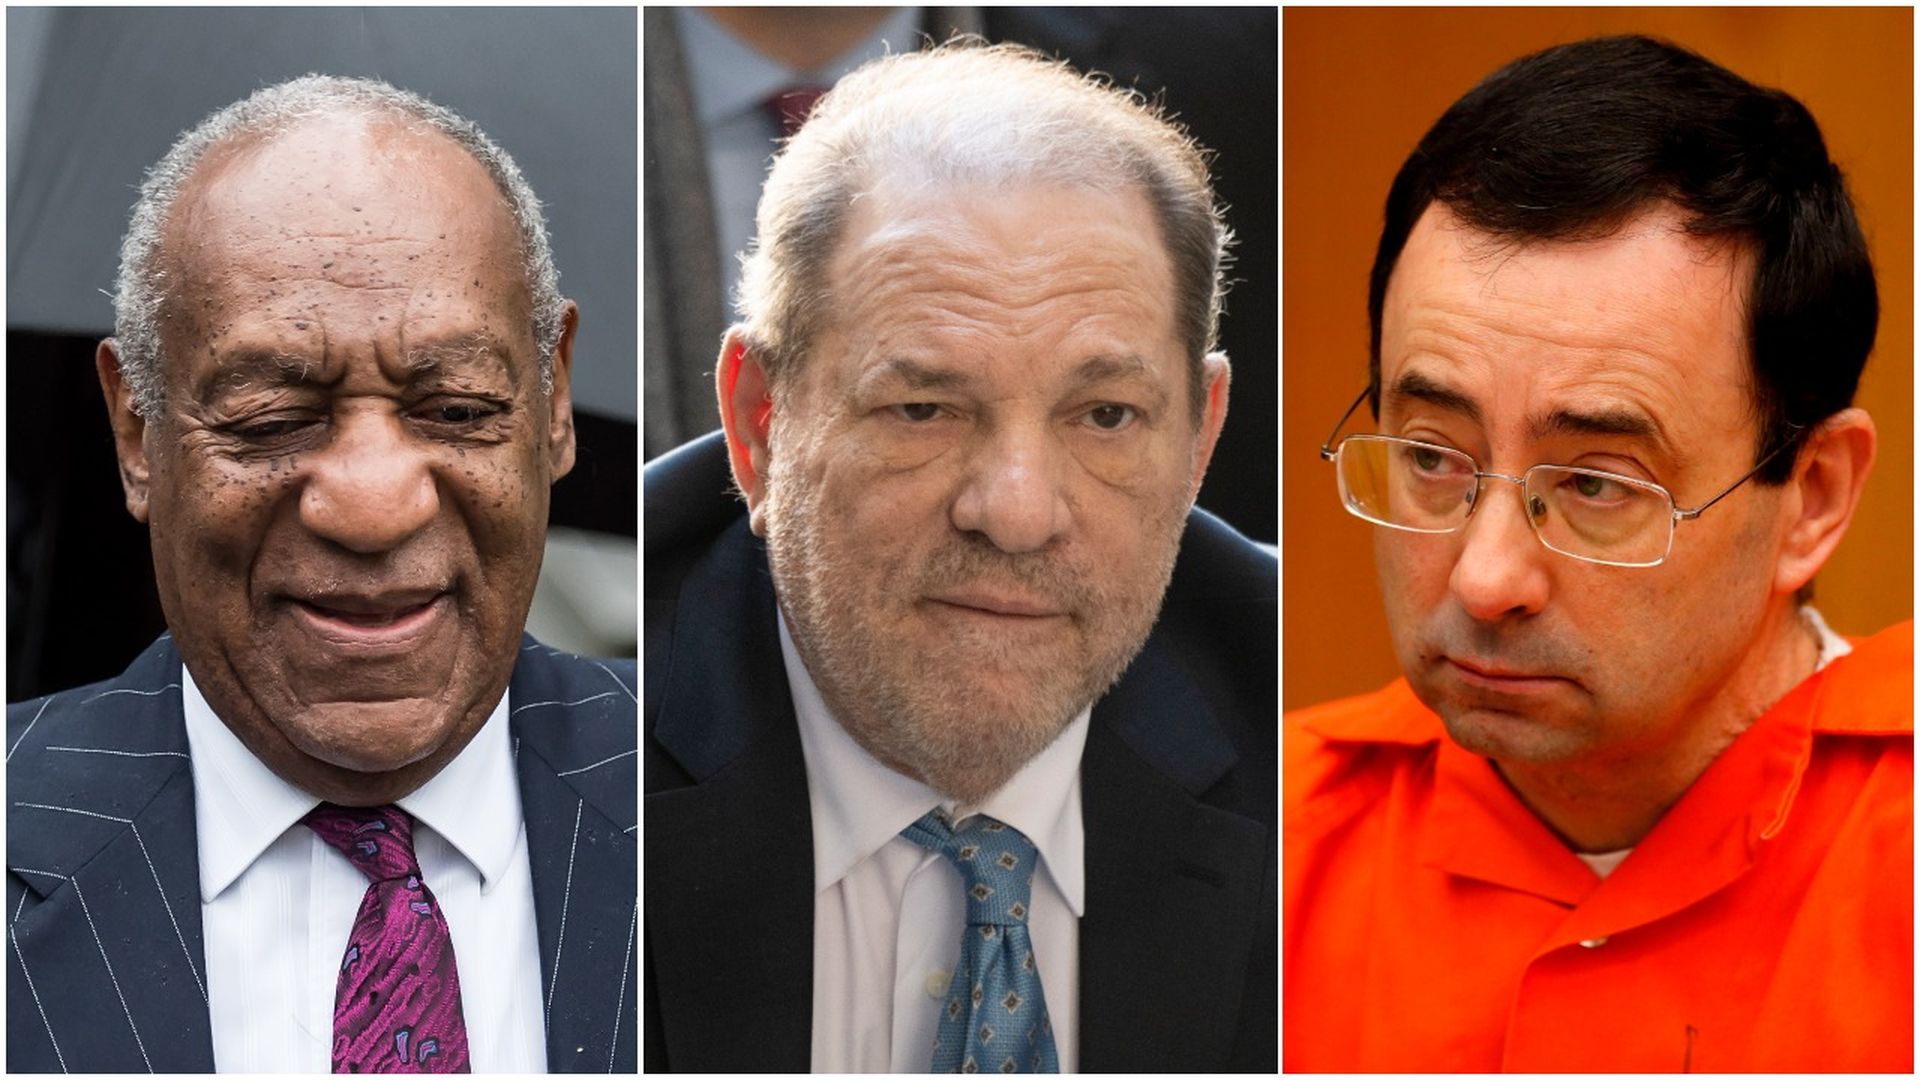 This image is a three-way split screen of Bill Cosby, Harvey Weinstein and Larry Nassar